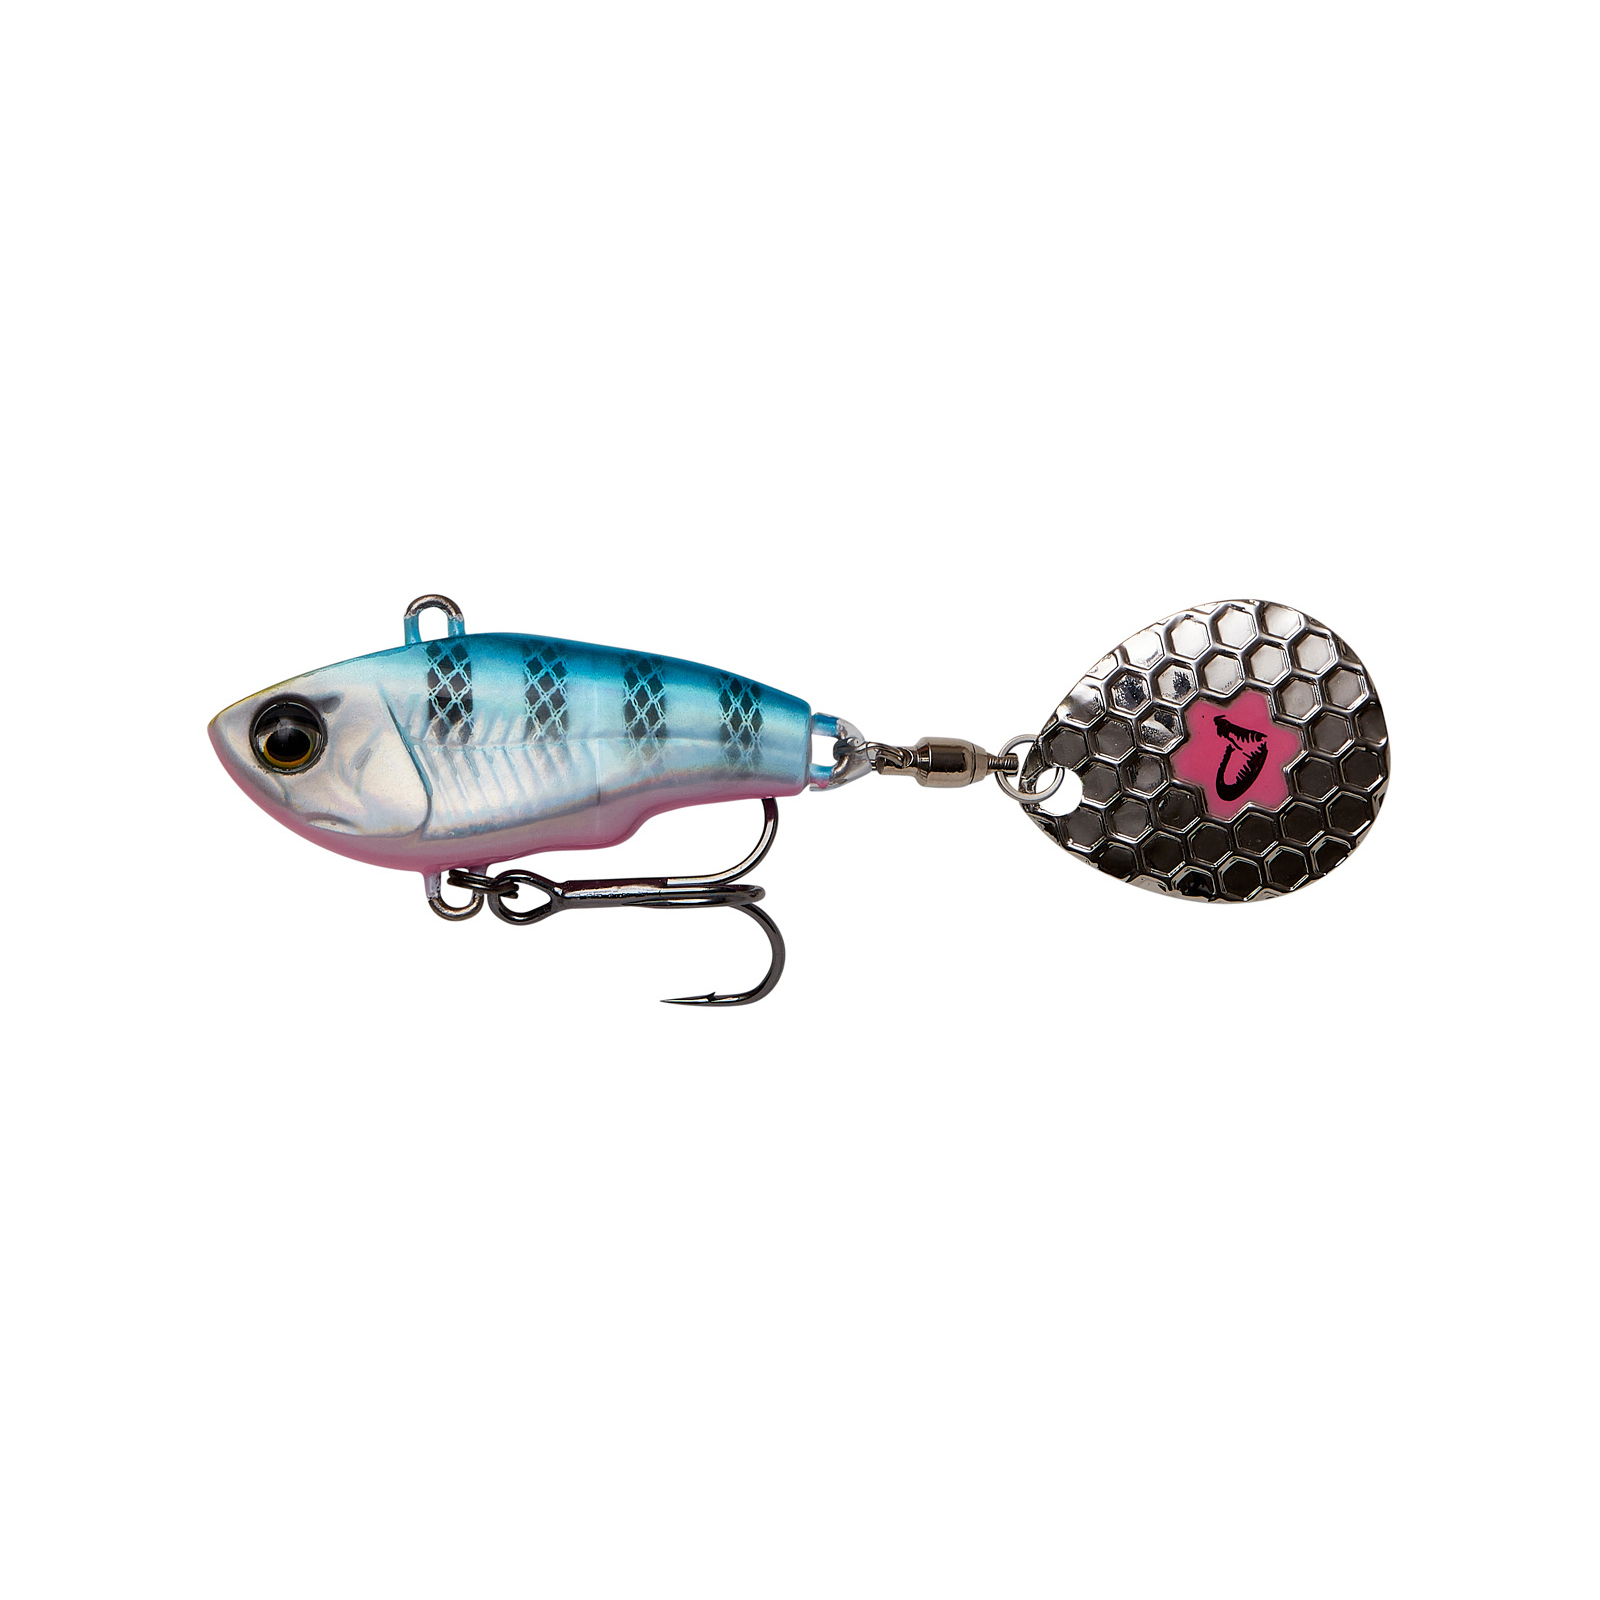 Блешня Savage Gear Fat Tail Spin 65mm 16.0g Blue Silver Pink (1854.11.74)